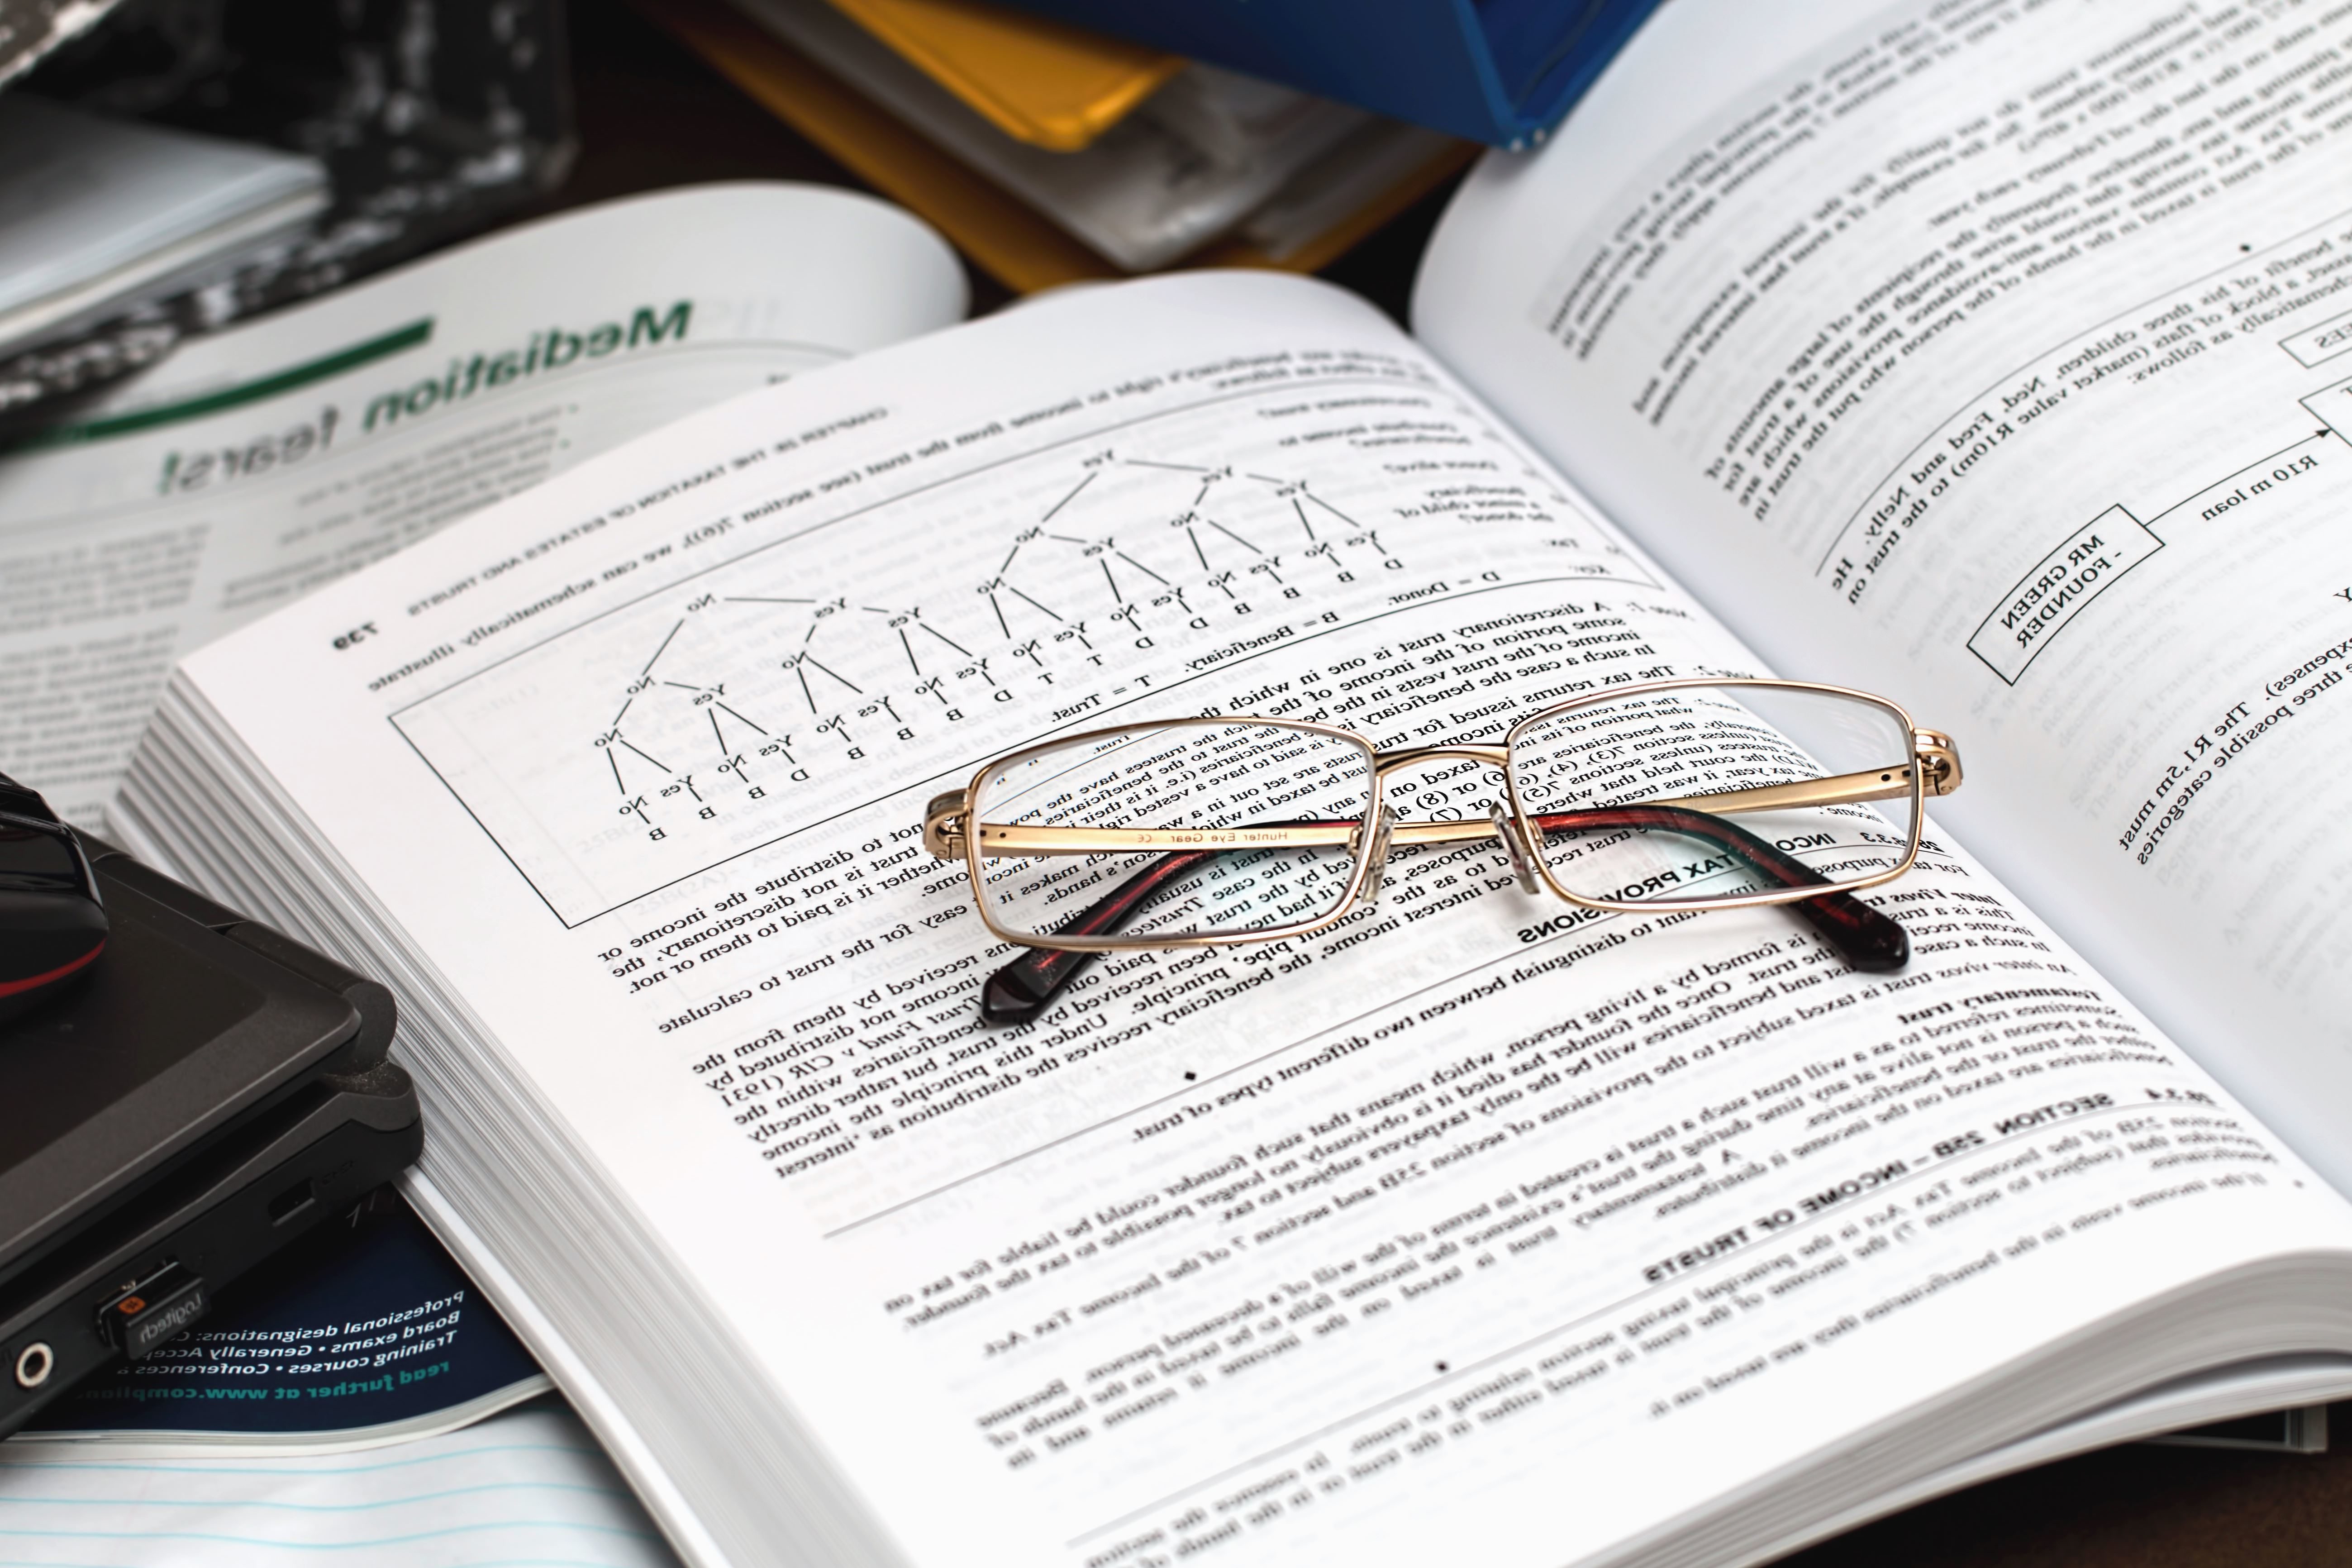 Free picture: eyeglasses, book, science, study, paper, reading5198 x 3465